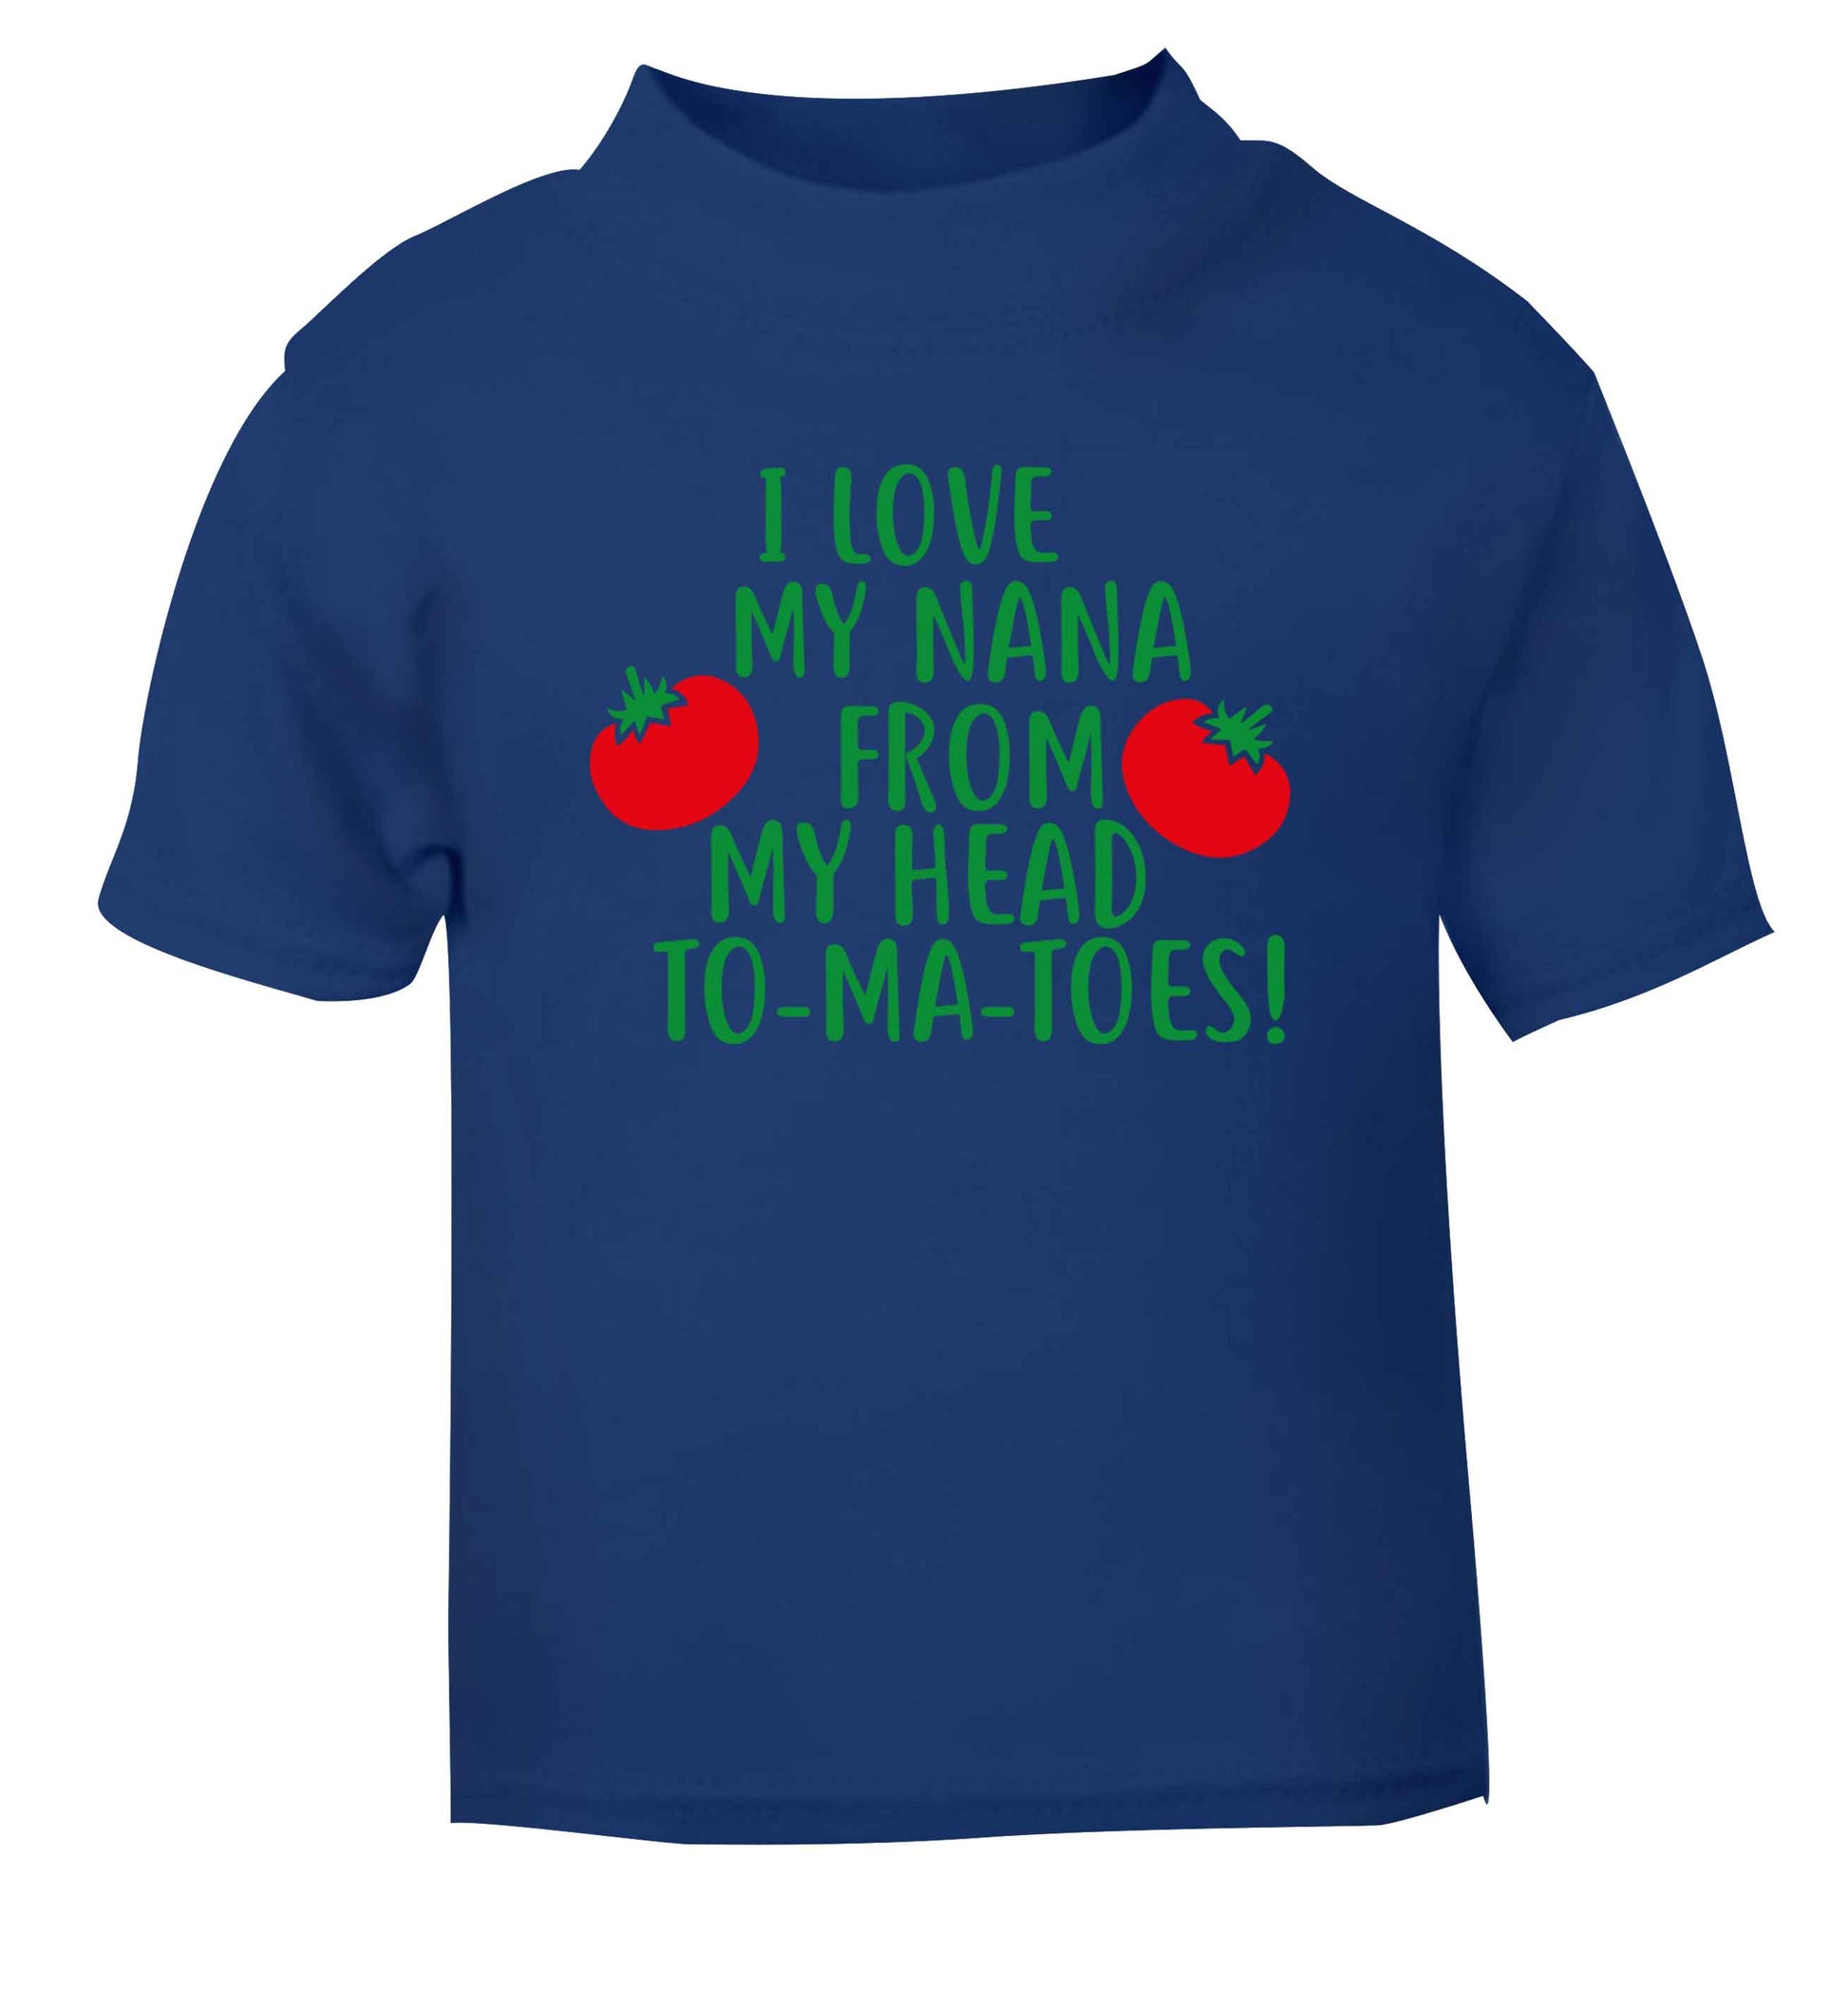 I love my nana from my head to-ma-toes blue Baby Toddler Tshirt 2 Years